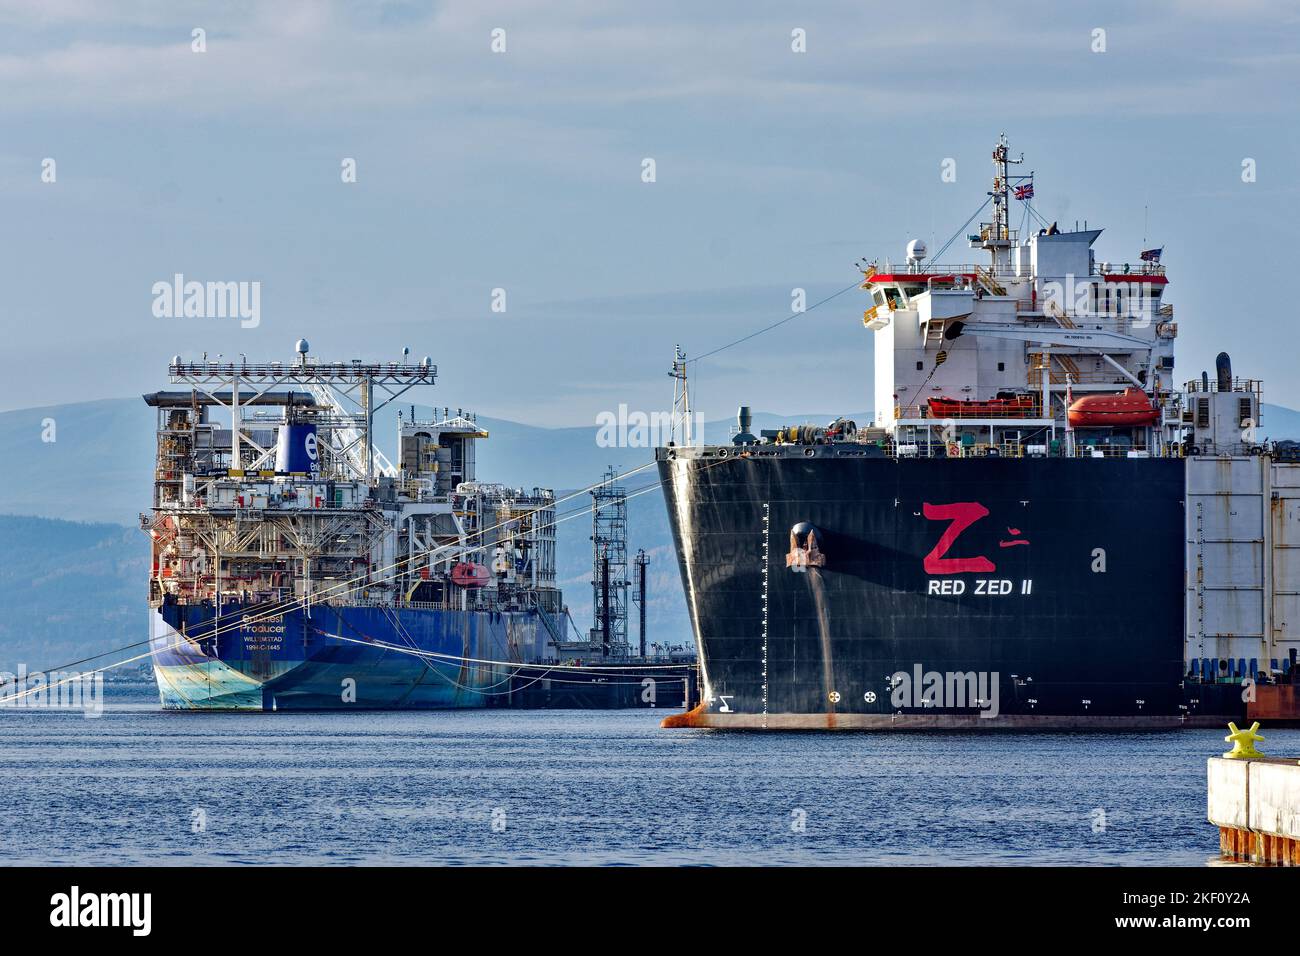 Cromarty Firth Scotland vessels Enquest Producer and Red Zed II moored at Nigg Stock Photo